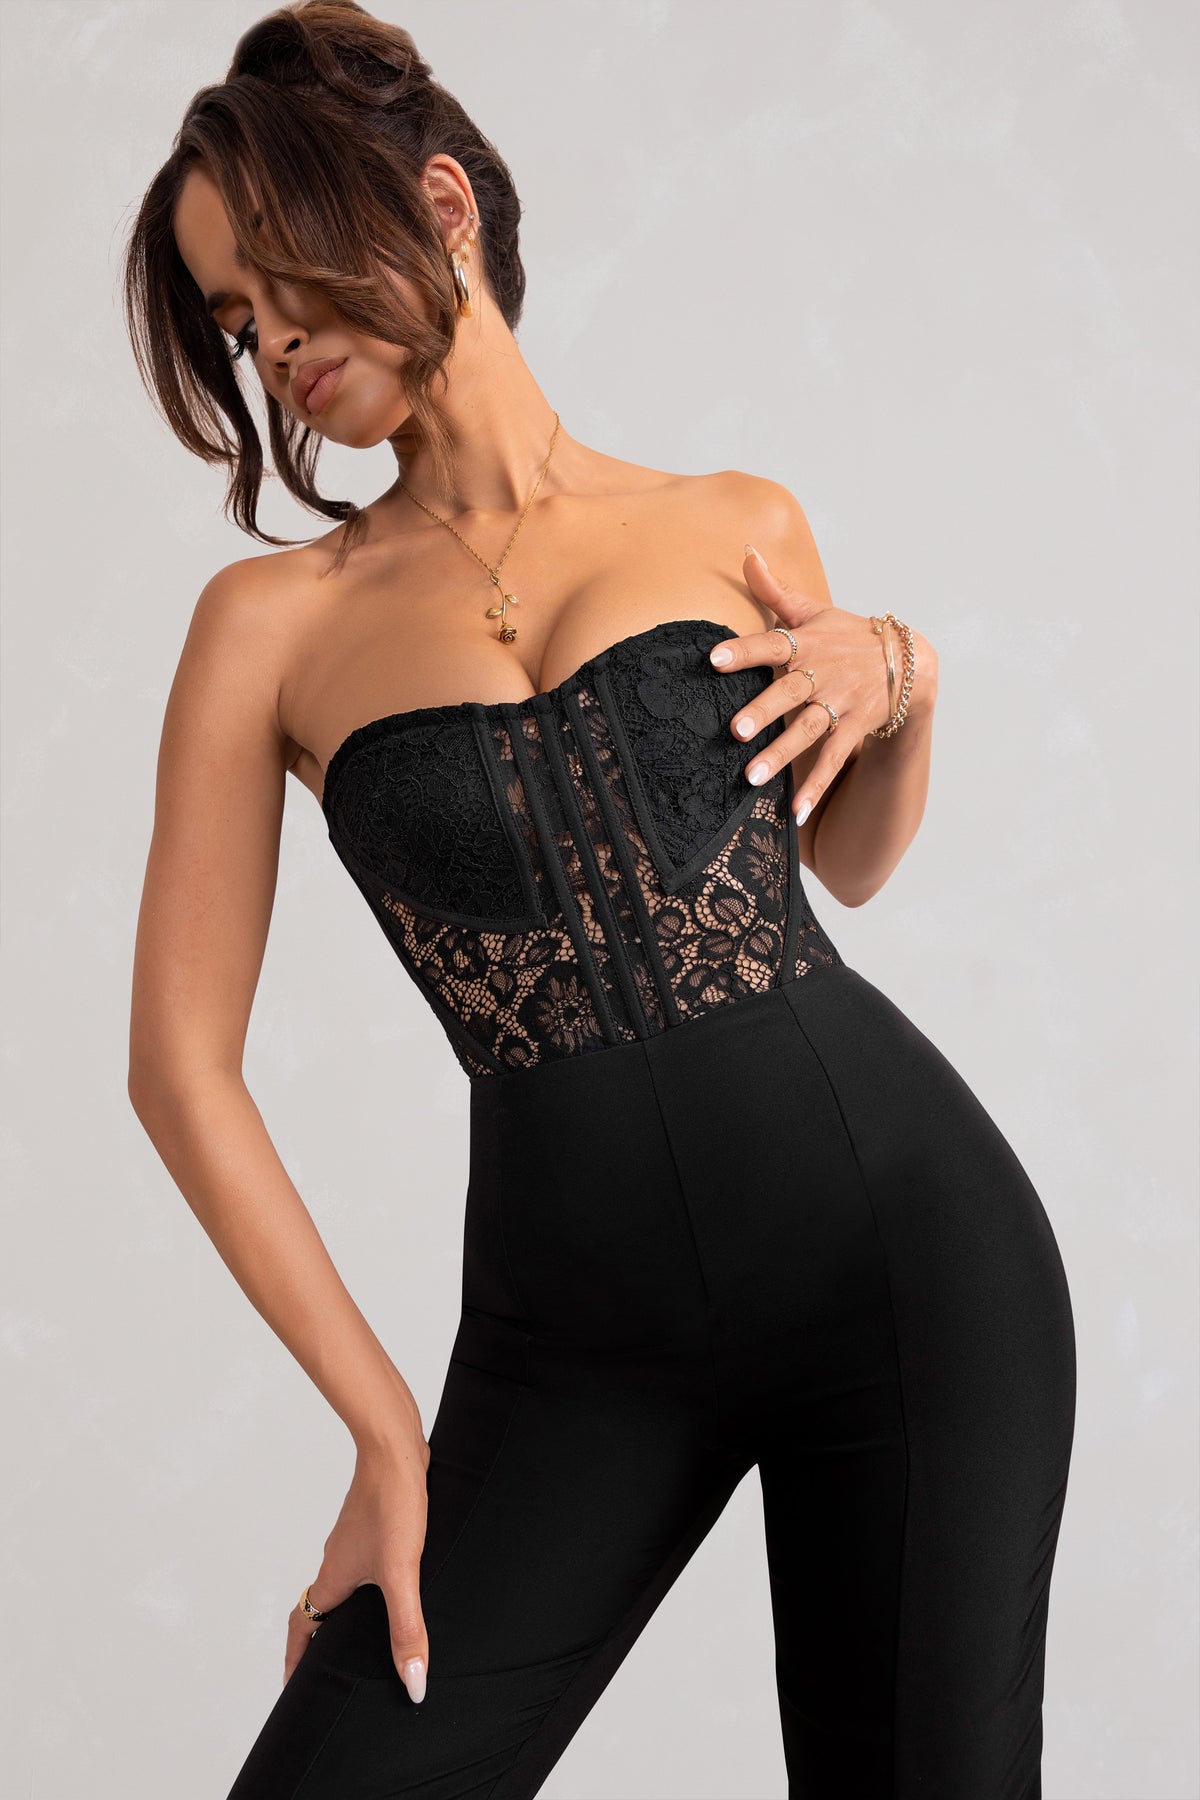 All Over You Black Lace Bustier Bodysuit